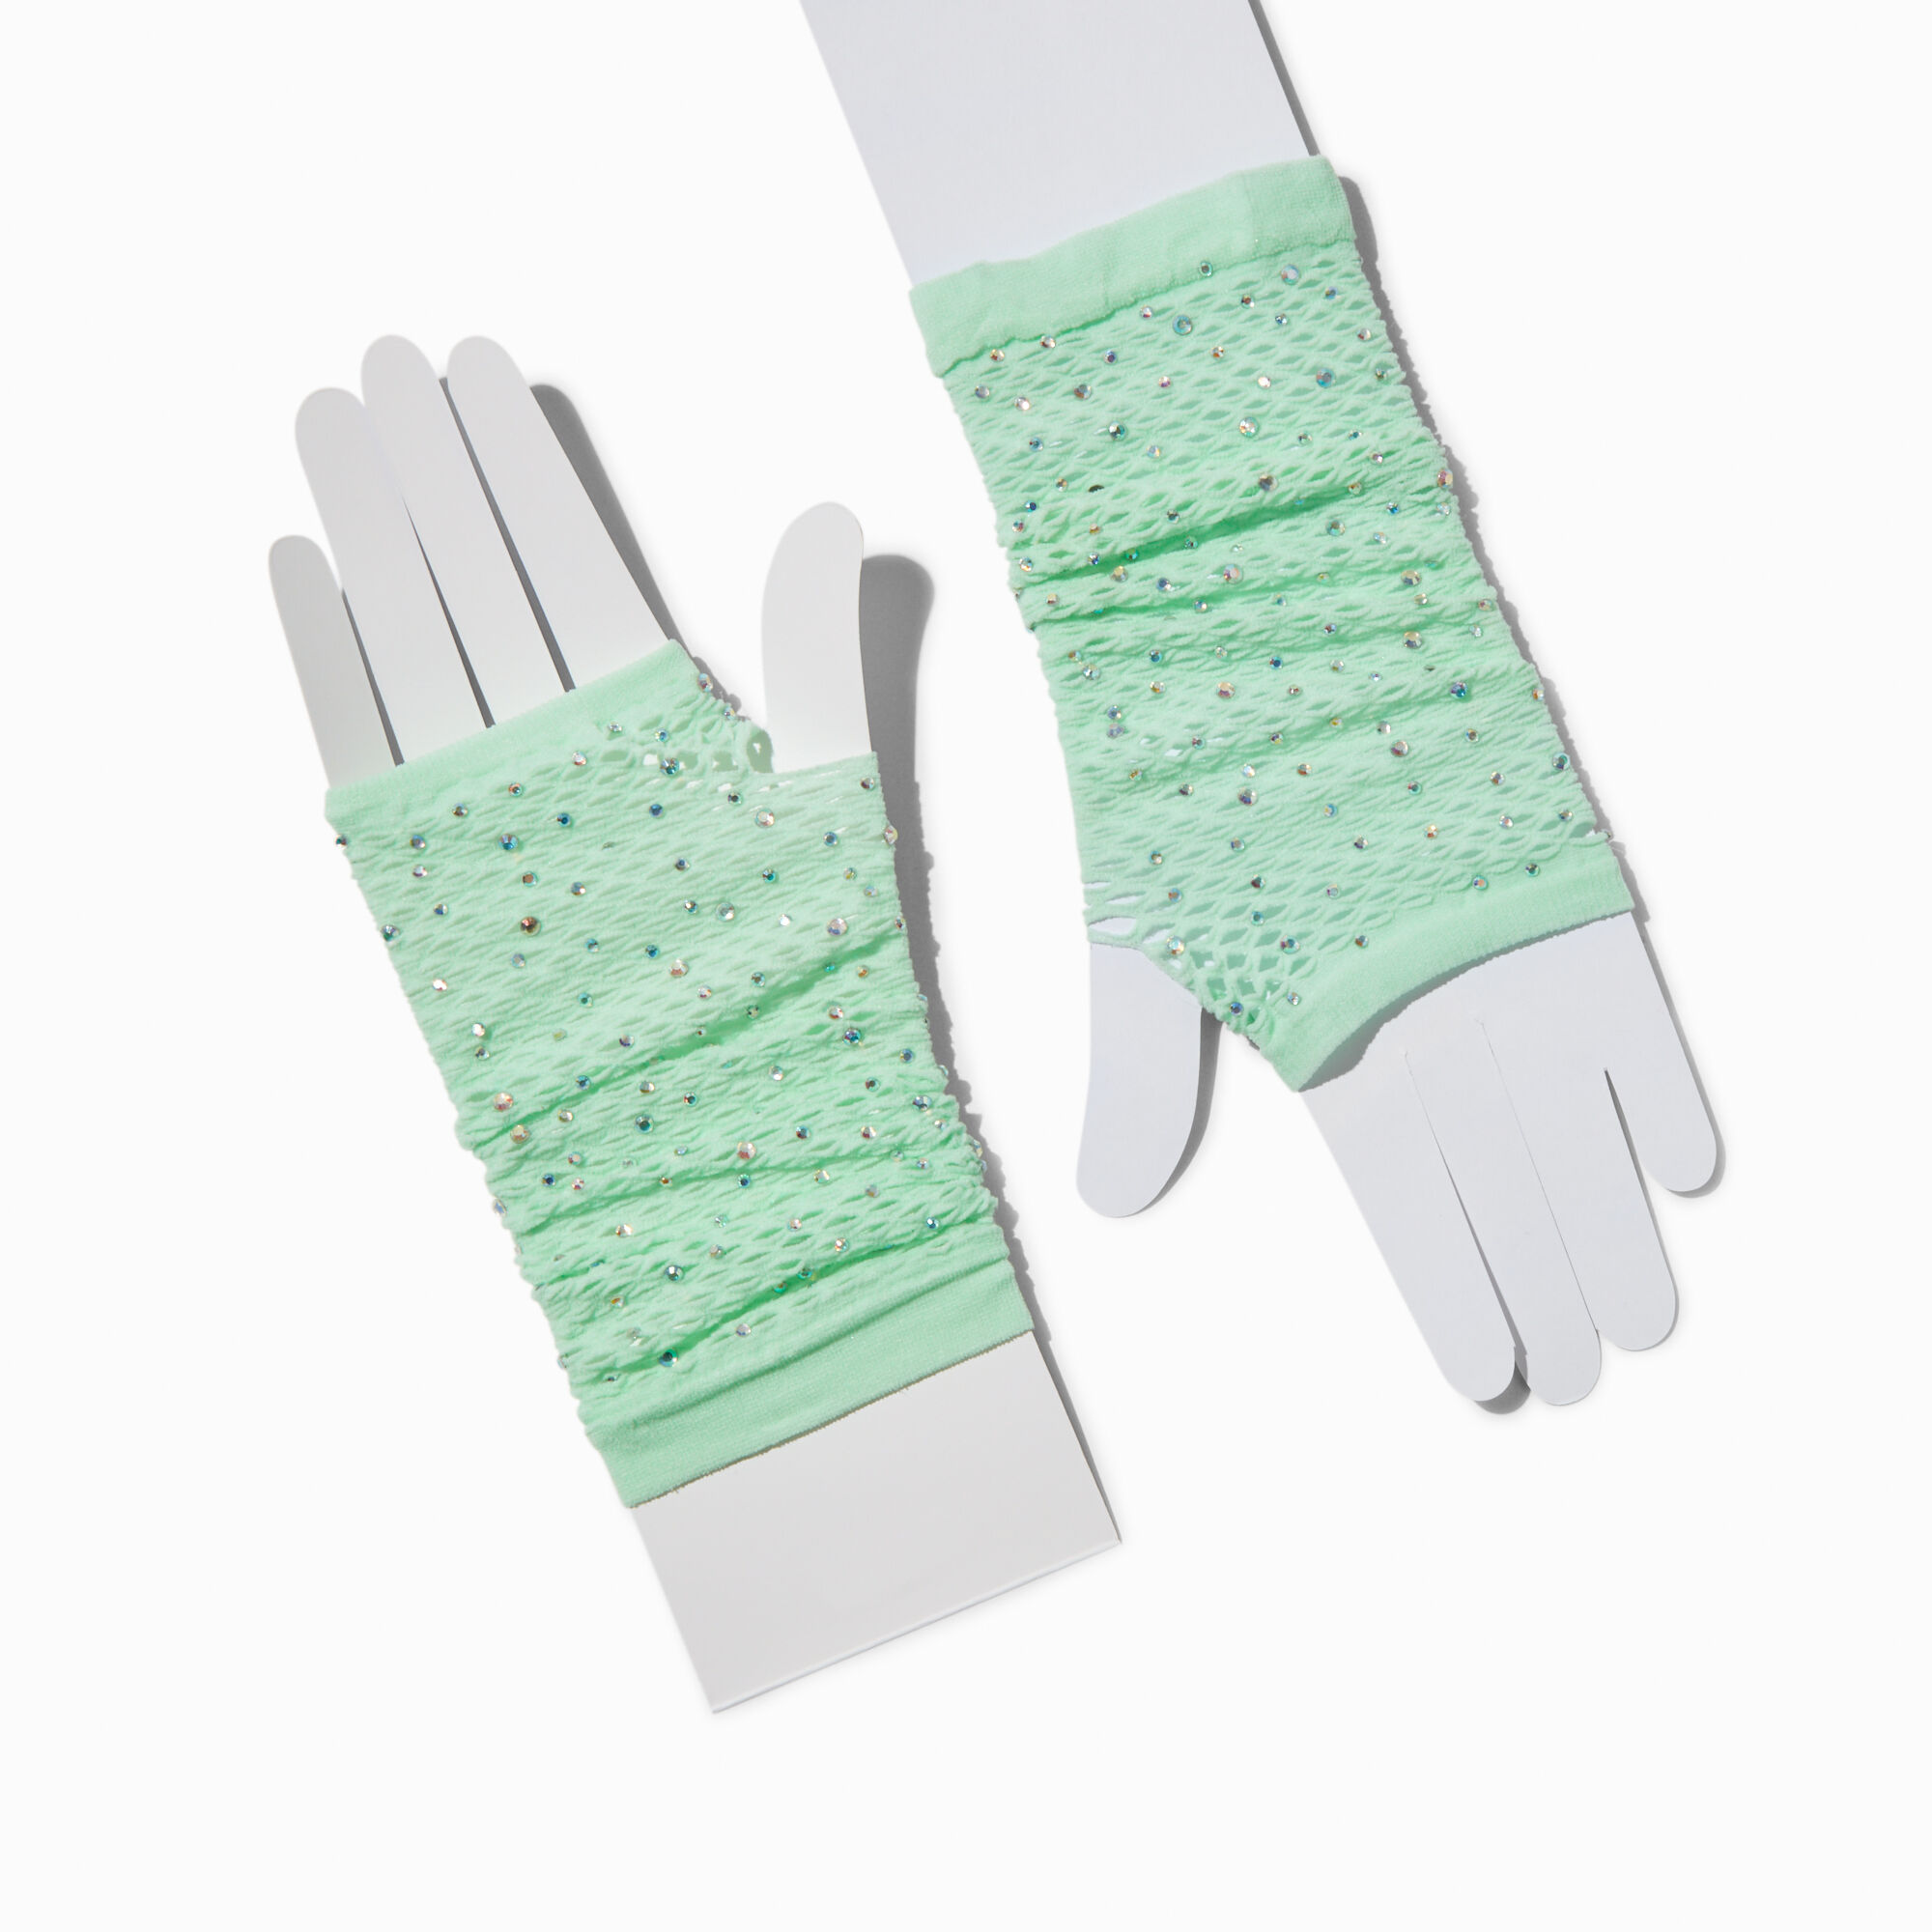 View Claires Mint Crystal Fishnet Fingerless Gloves Green information